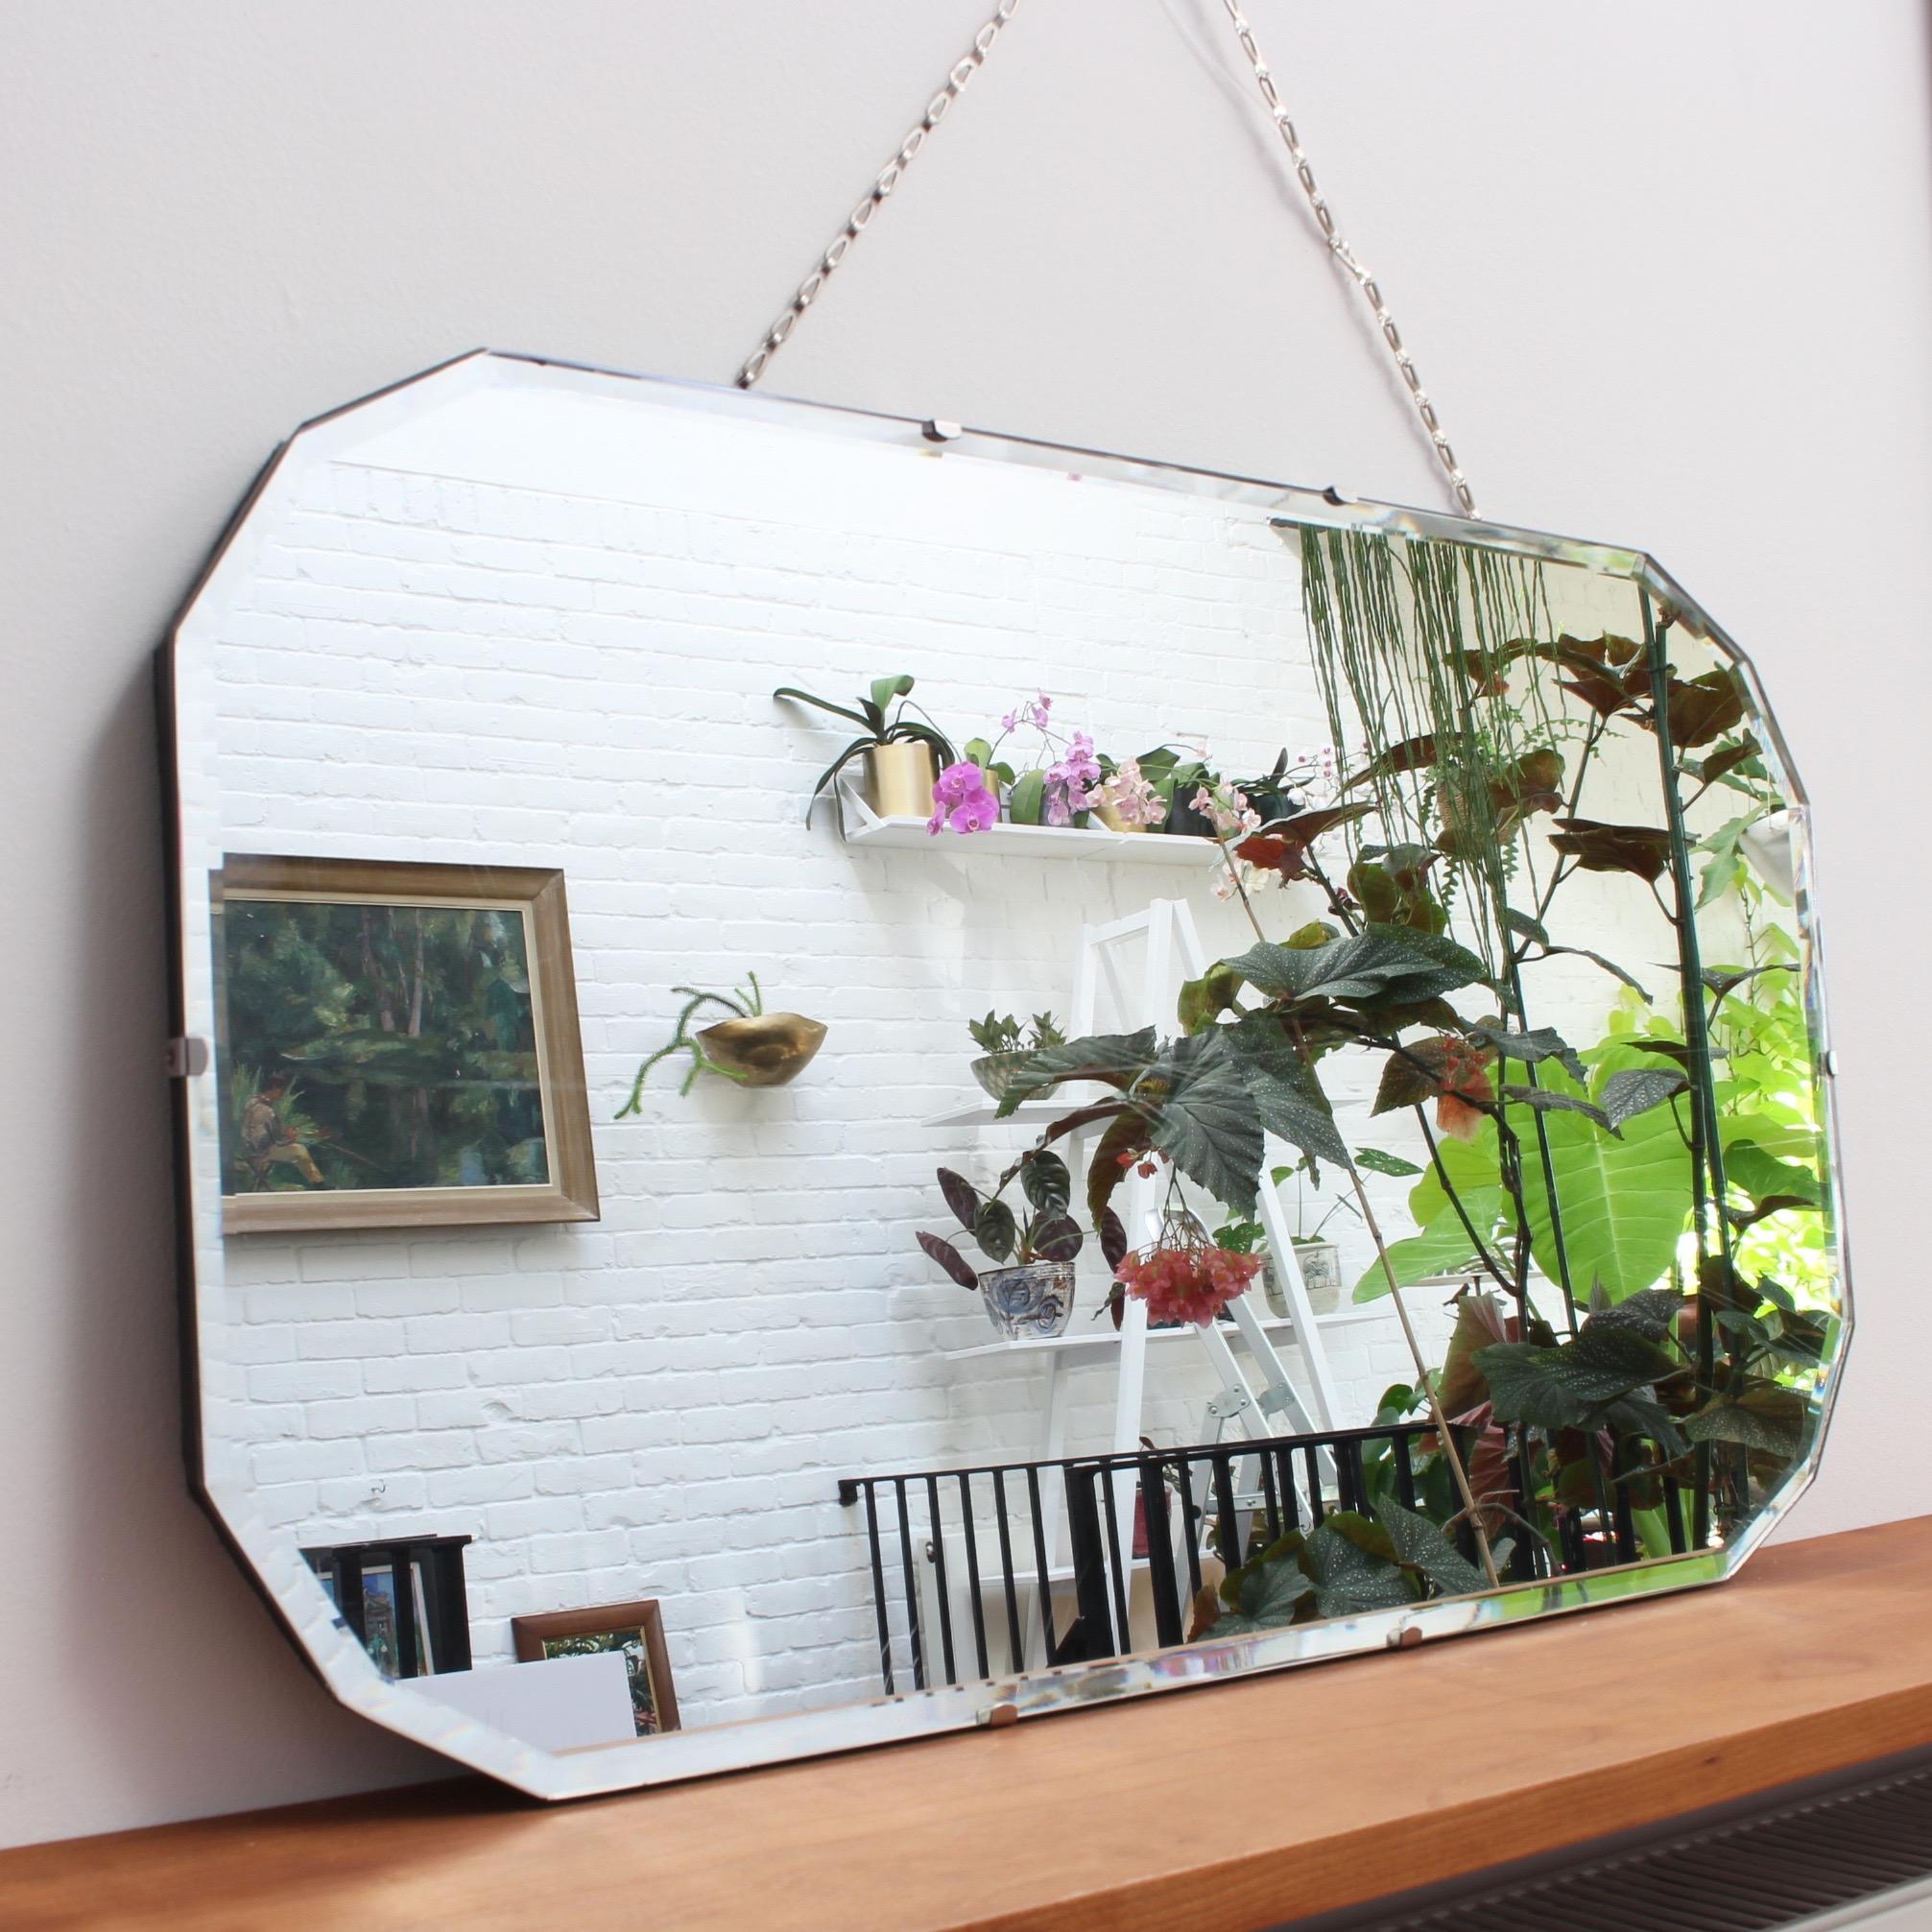 Midcentury English wall mirror with rare 12-sided shape (circa 1950s). With a horizontal orientation it has a linked-metal hanging chain. The mirror will have the effect of visually enlarging the room on whose wall it hangs. It is a classic mirror